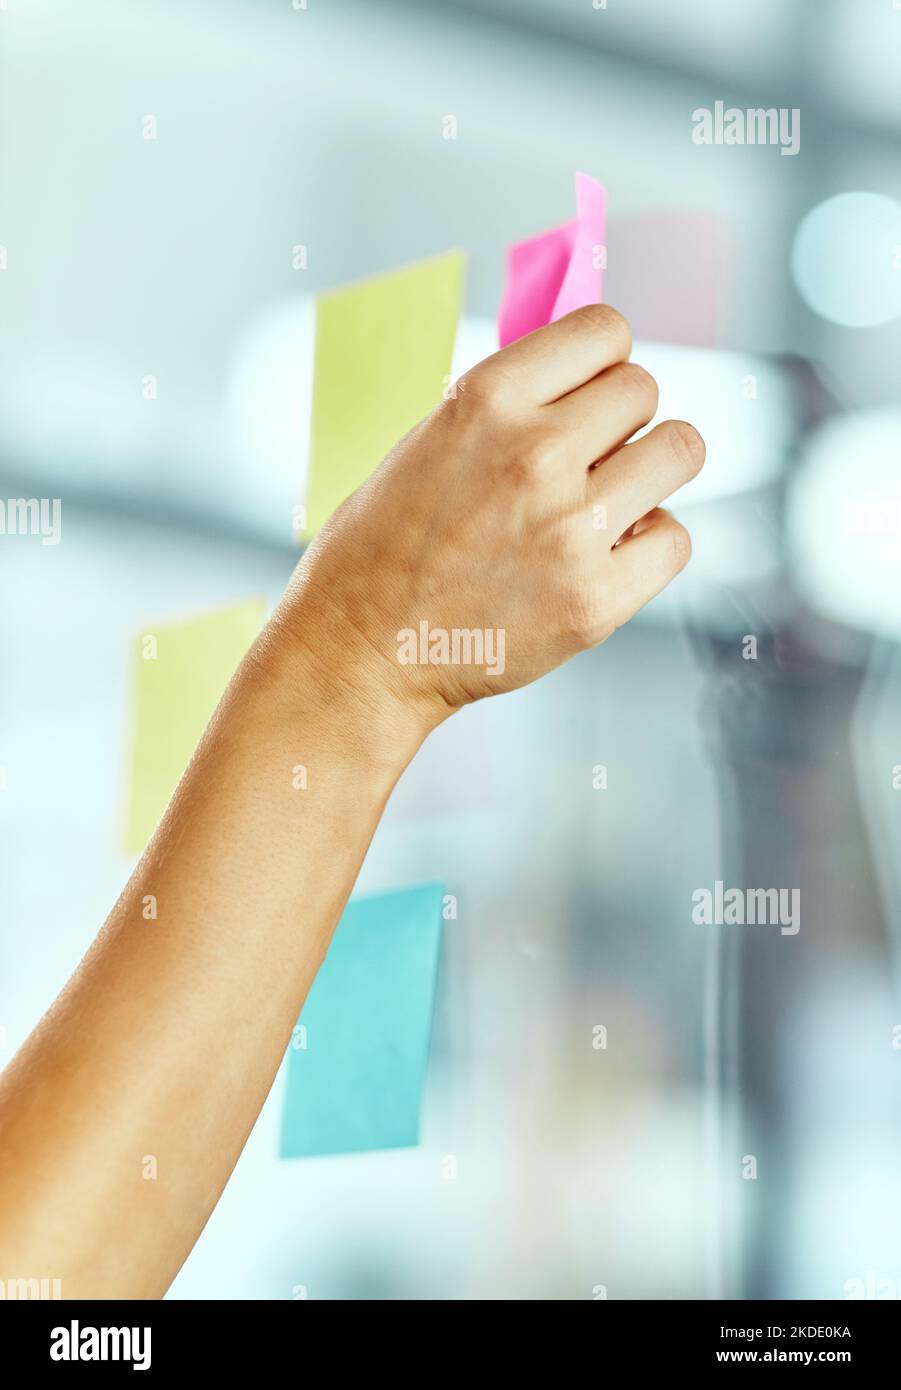 Let the brainstorming begin. a woman pasting notes on glass during a brainstorming session at work. Stock Photo